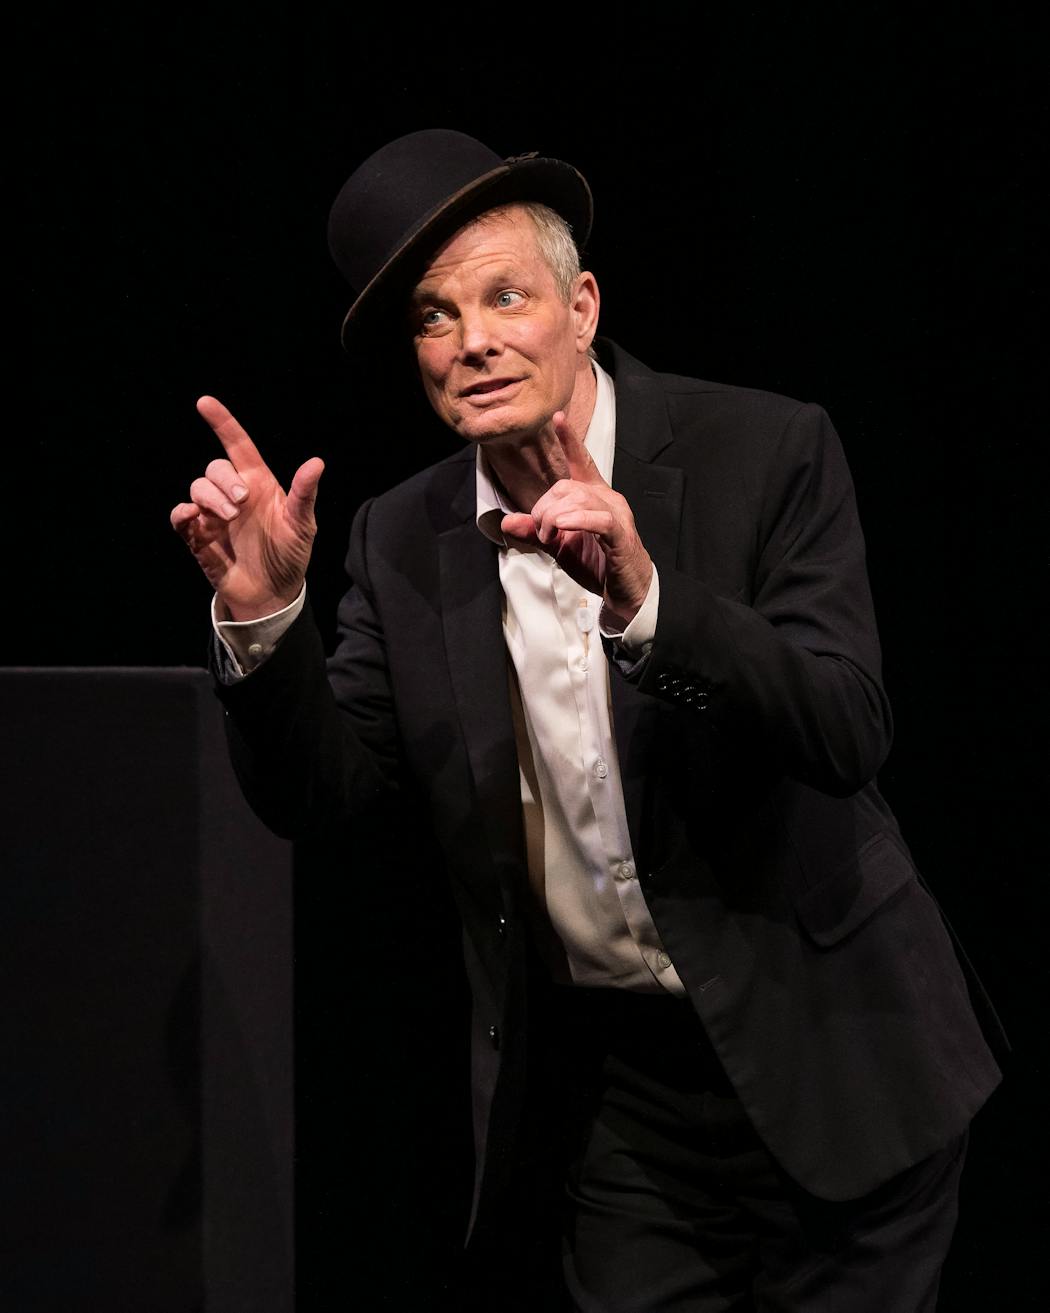 Bill Irwin displays both verbal and physical comedy in his portrayal of the Irish writer Samuel Beckett.